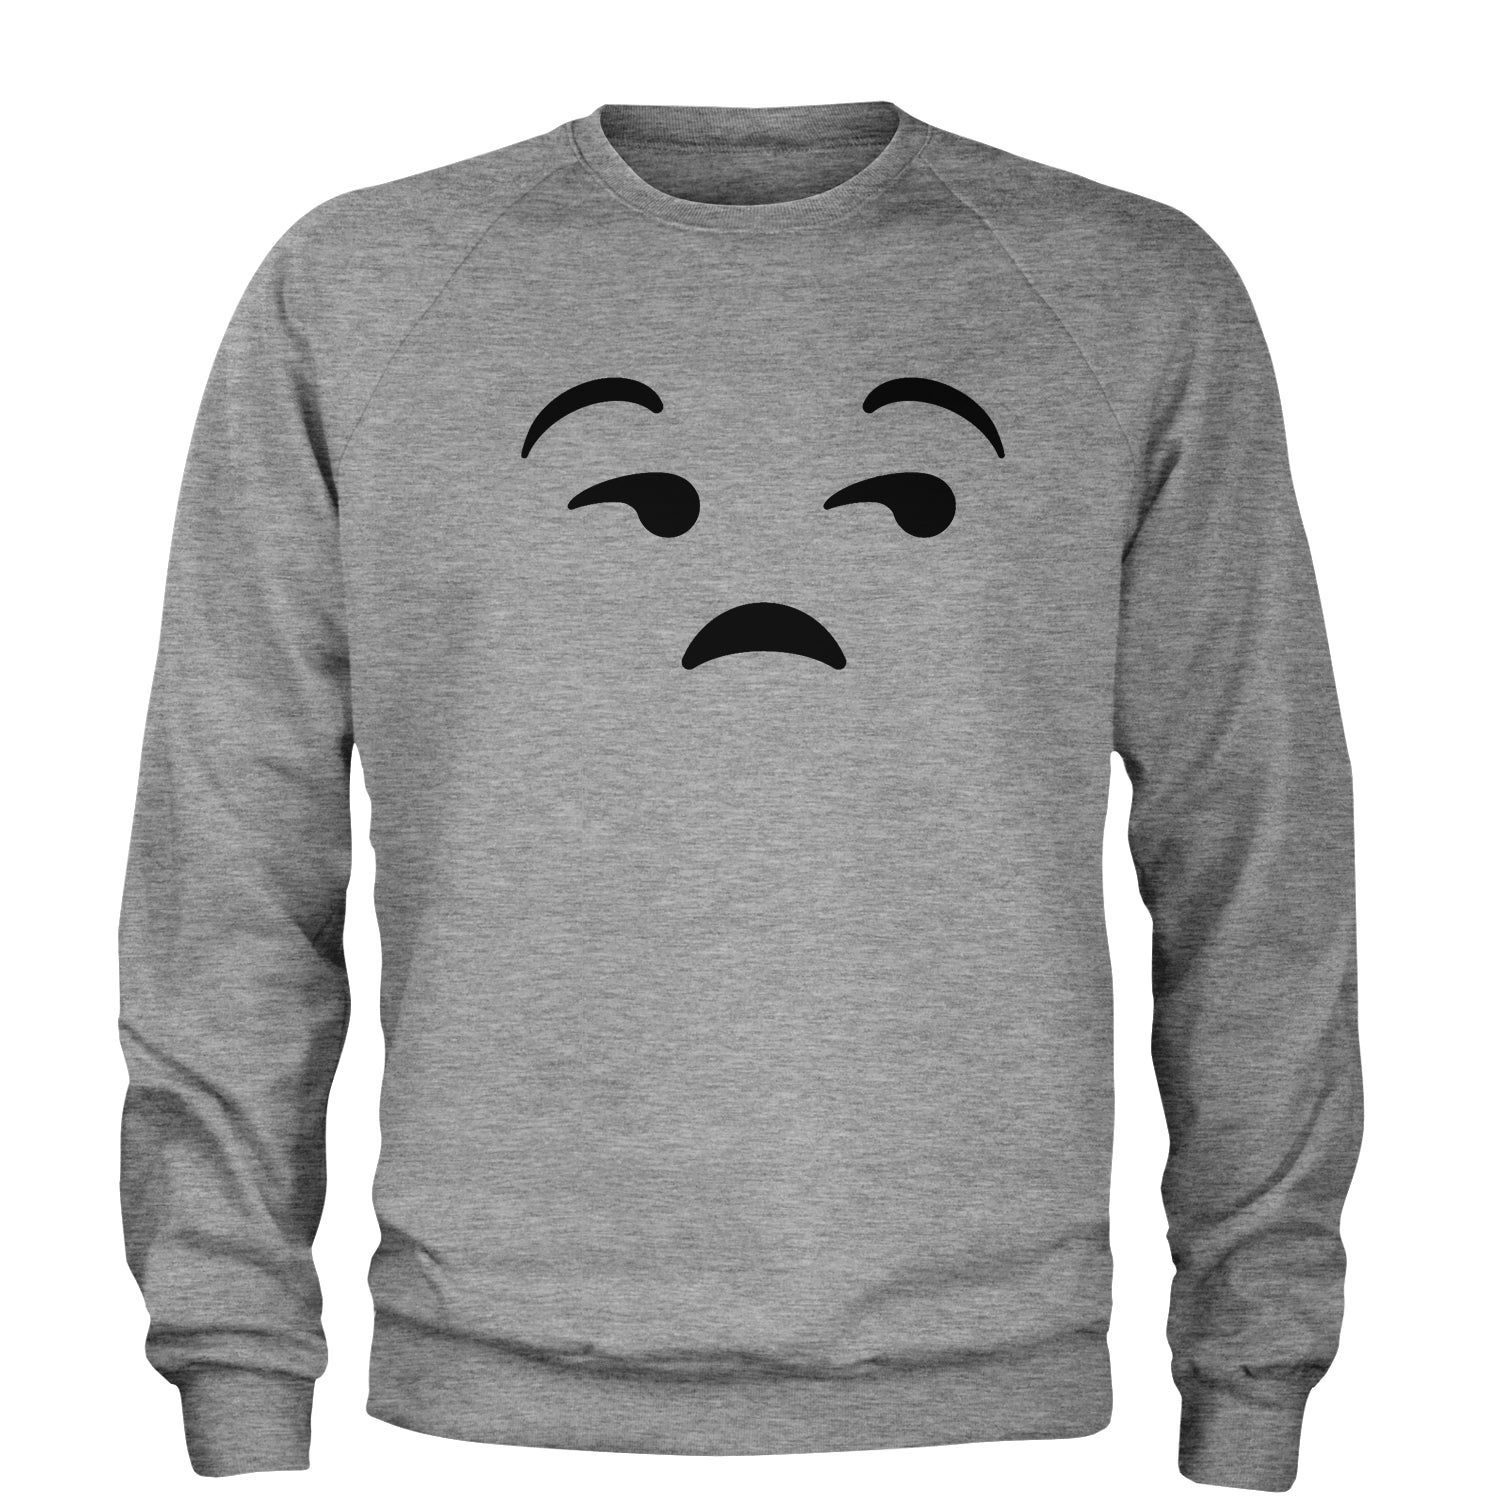 Emoticon Whatever Smile Face Adult Crewneck Sweatshirt cosplay, costume, dress, emoji, emote, face, halloween, smiley, up, yellow by Expression Tees